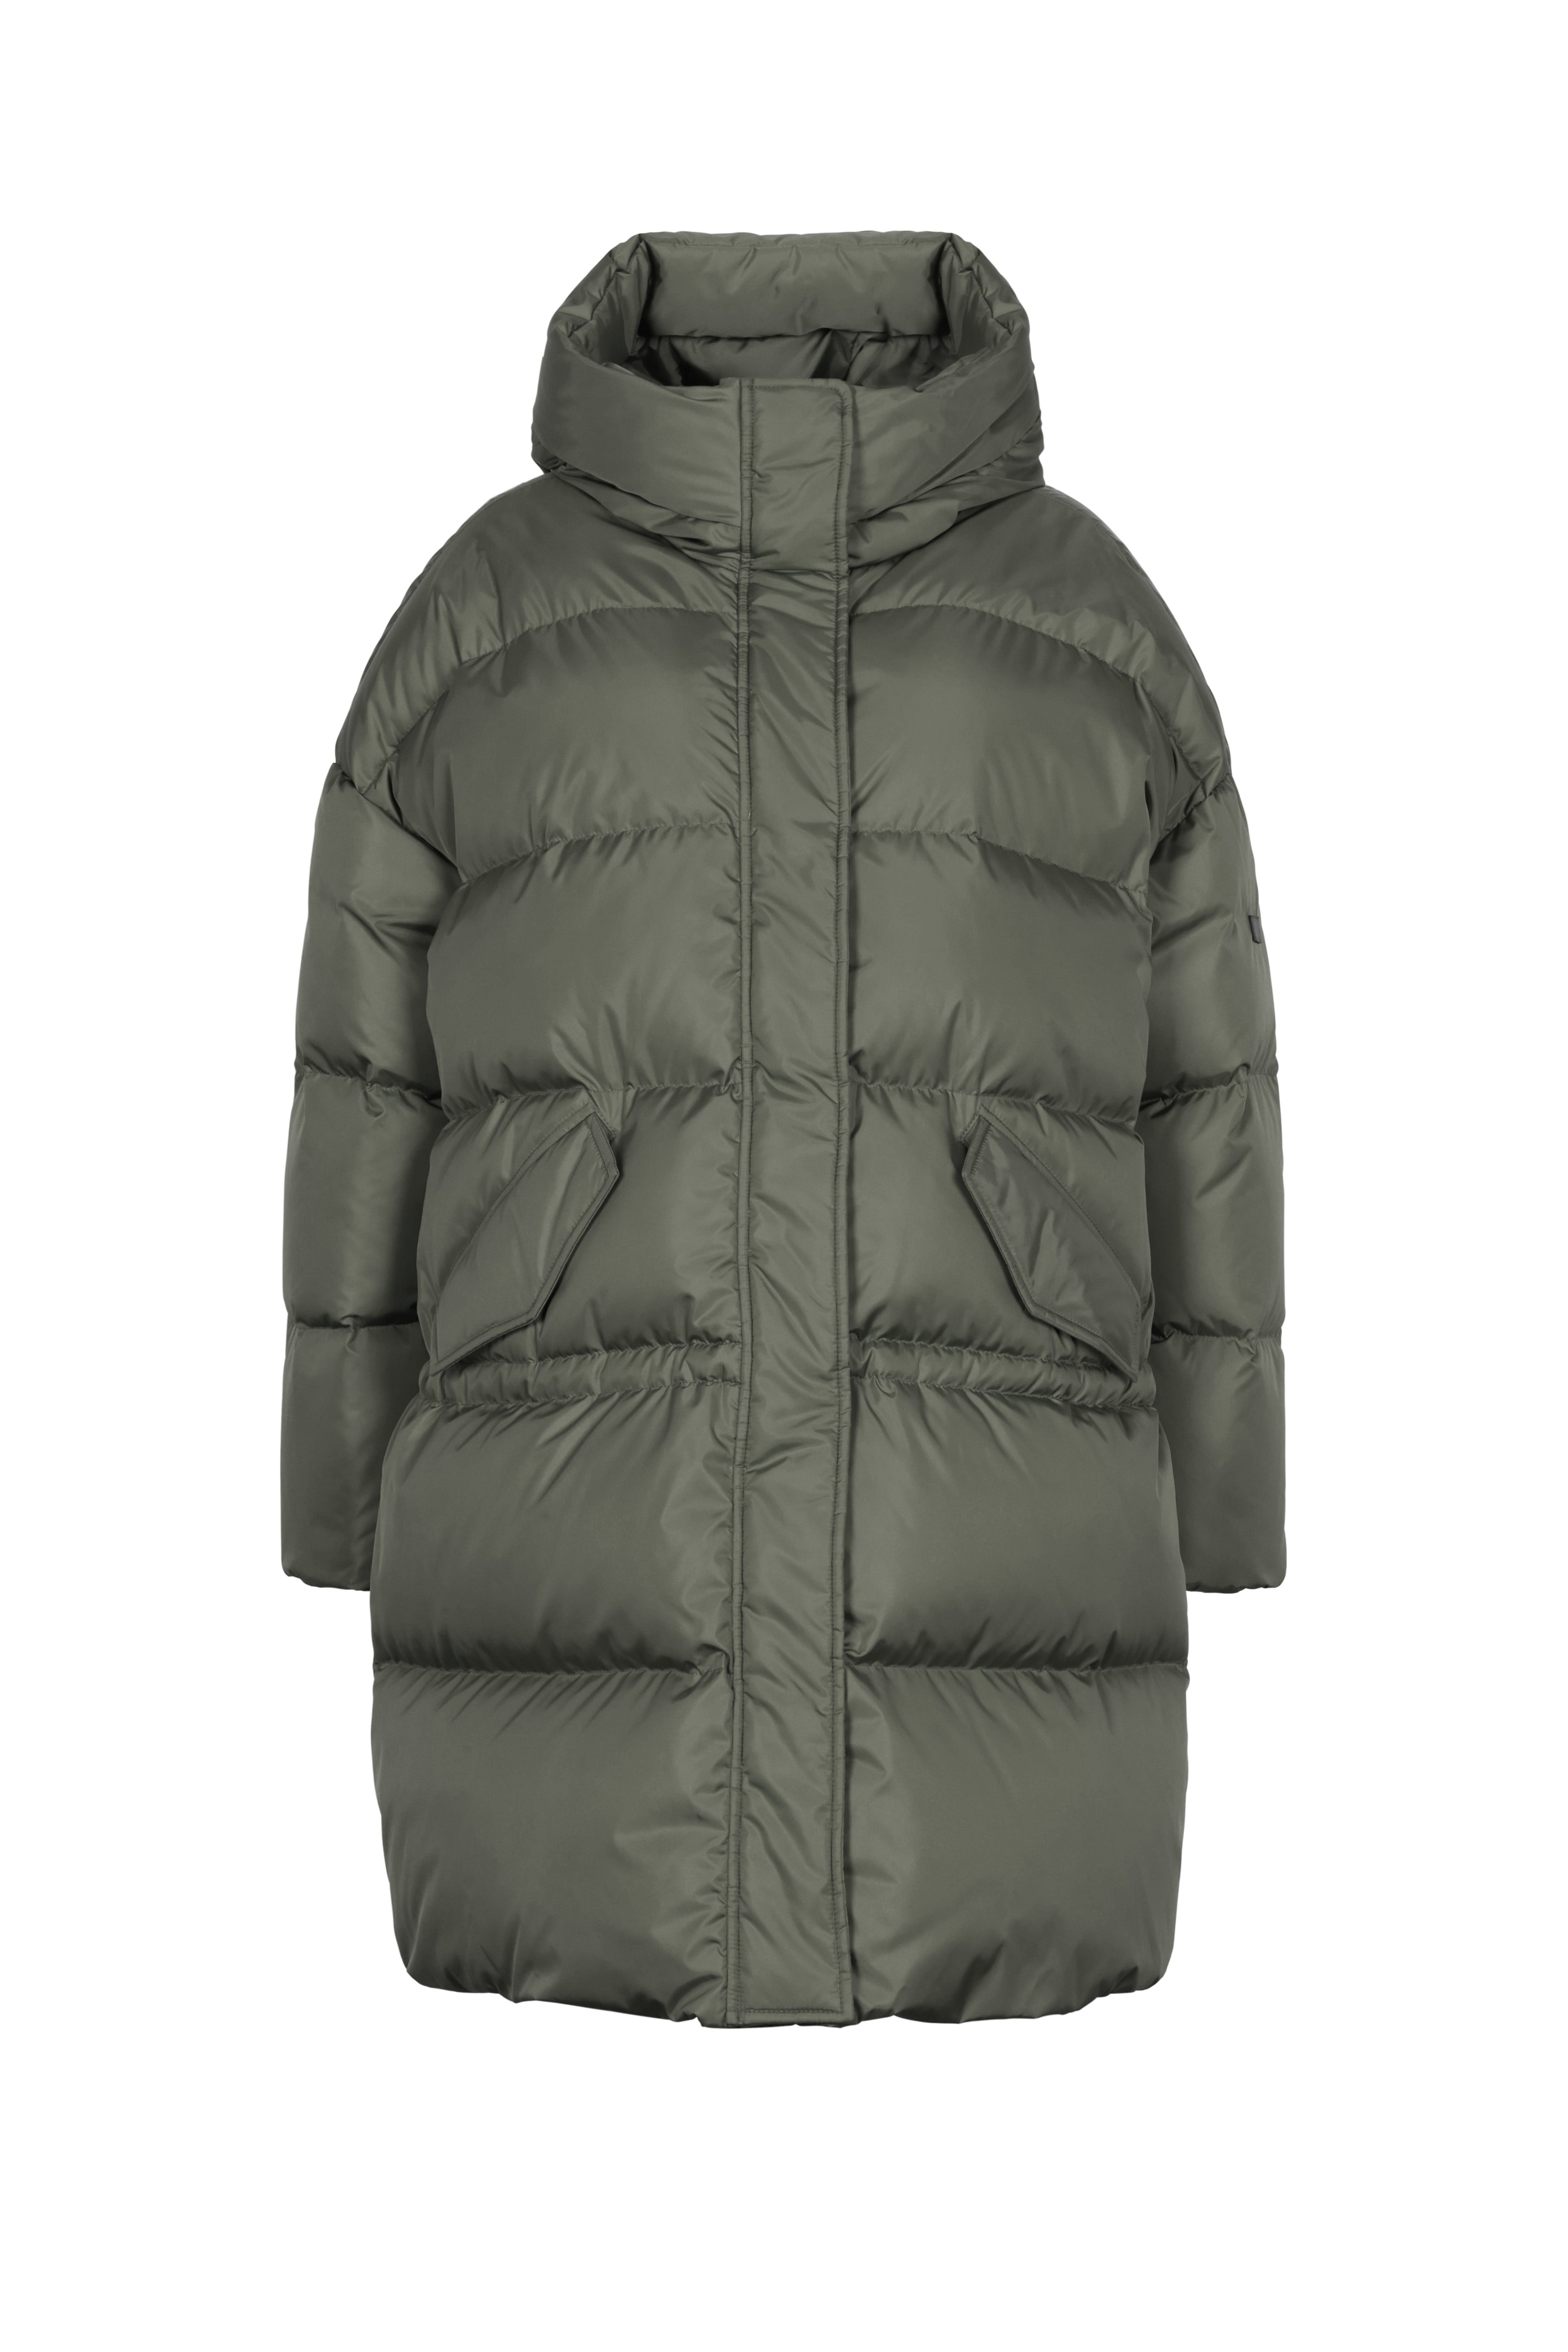 oversized Lempelius down parka in the color military green